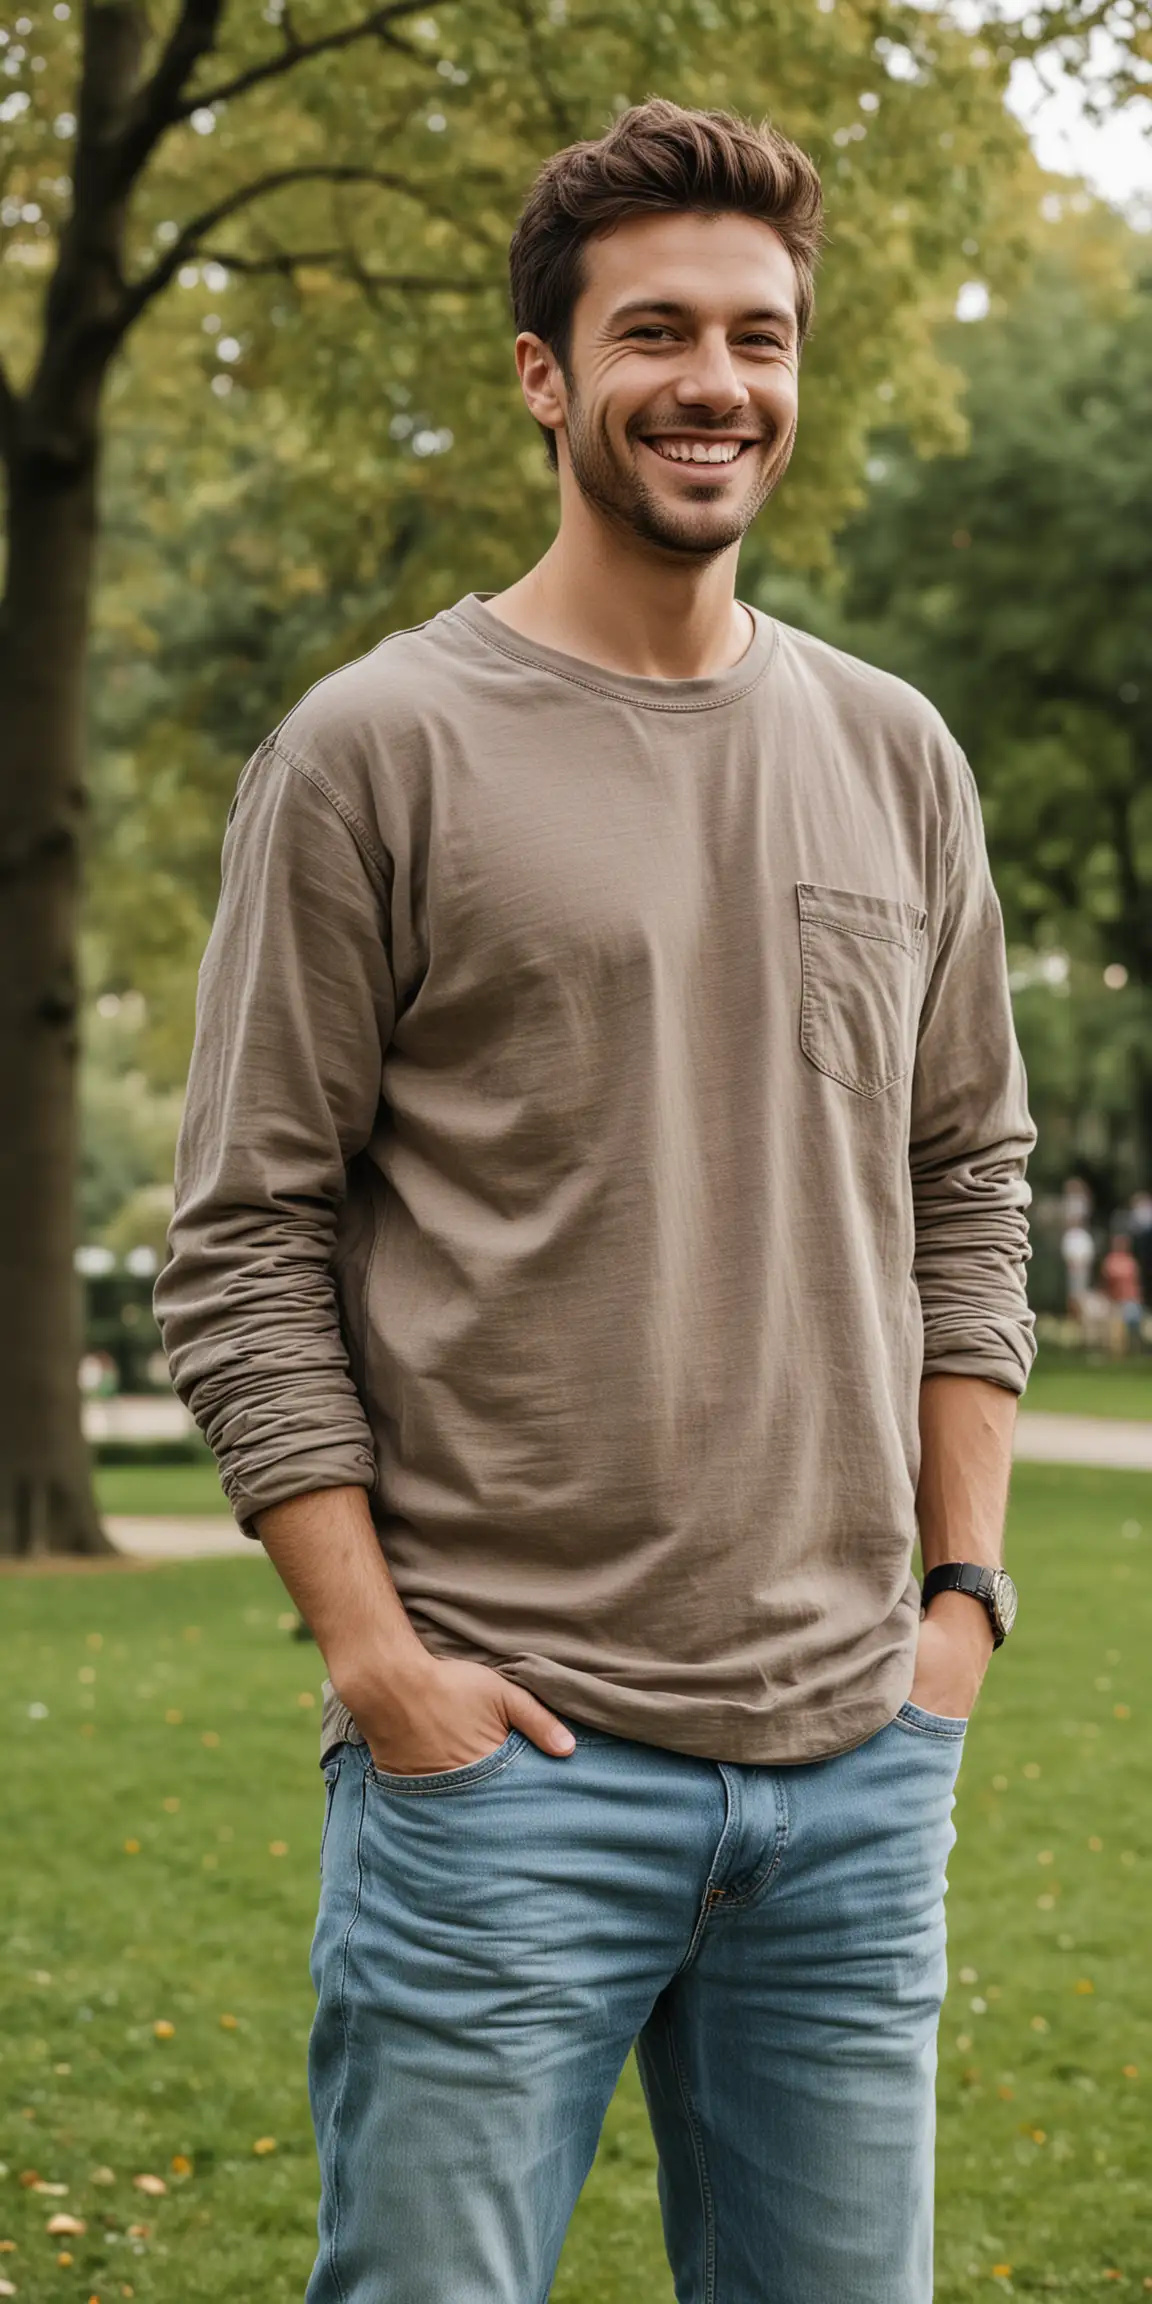 a man standing in a park setting, wearing casual clothes, smiling with his hands in his pockets